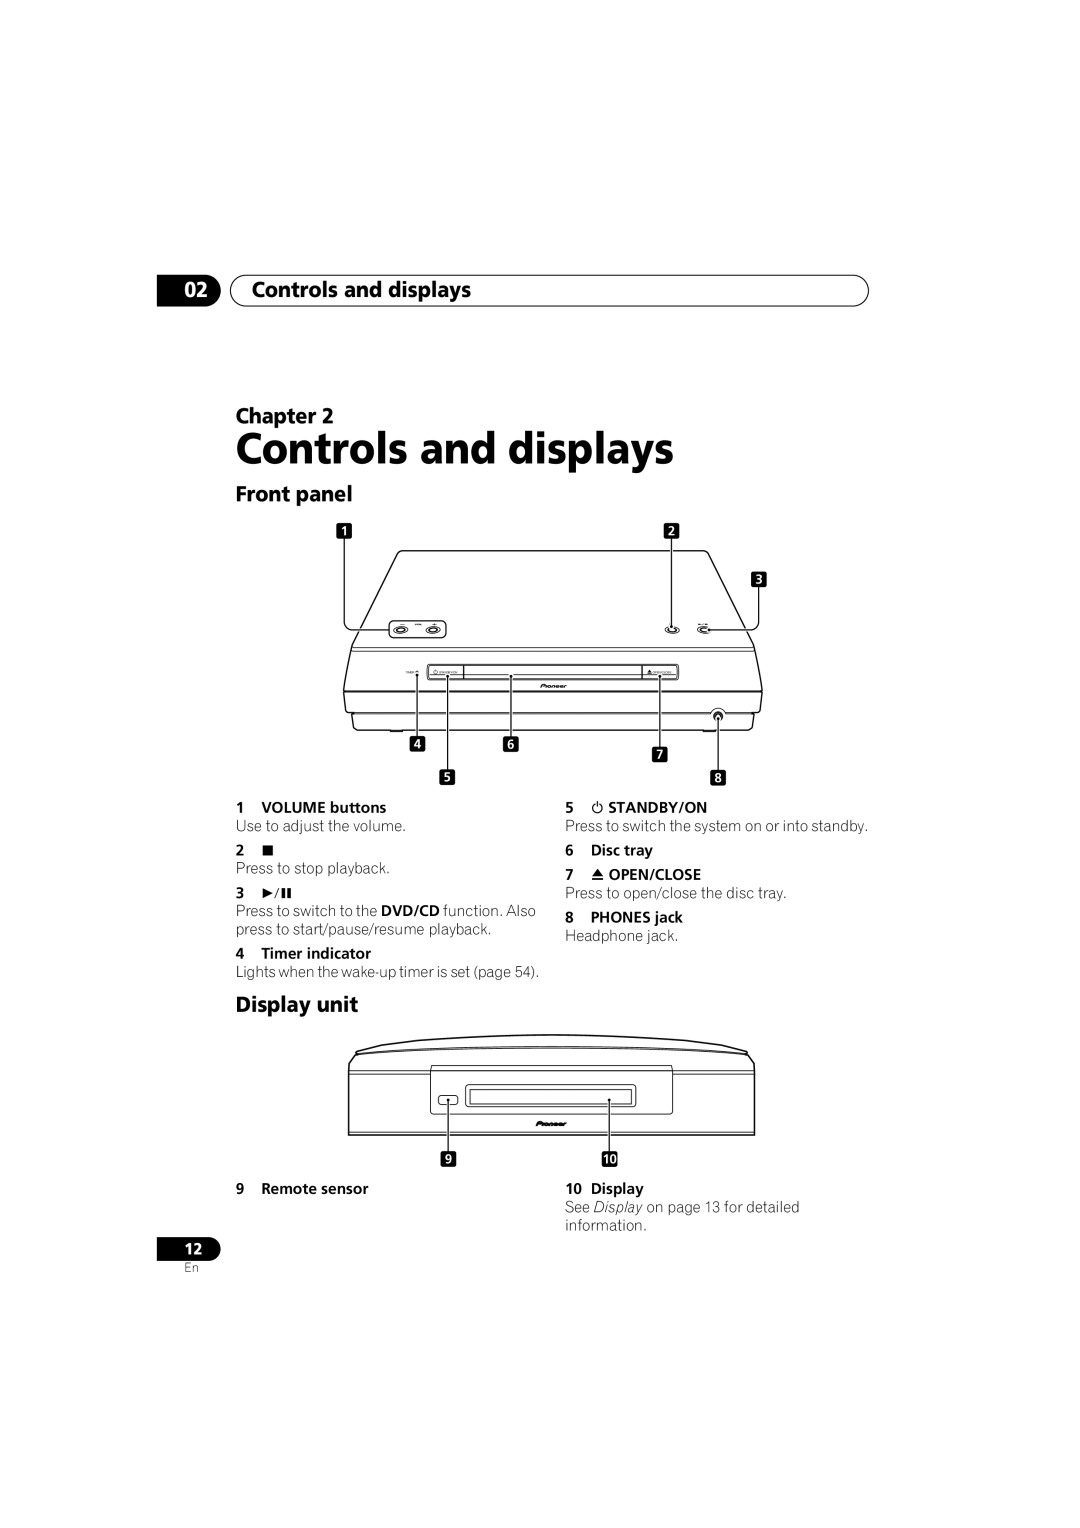 Pioneer XV-DV900, XV-DV700, S-DV900SW, S-DV700ST, S-DV700SW 02Controls and displays Chapter, Front panel, Display unit 